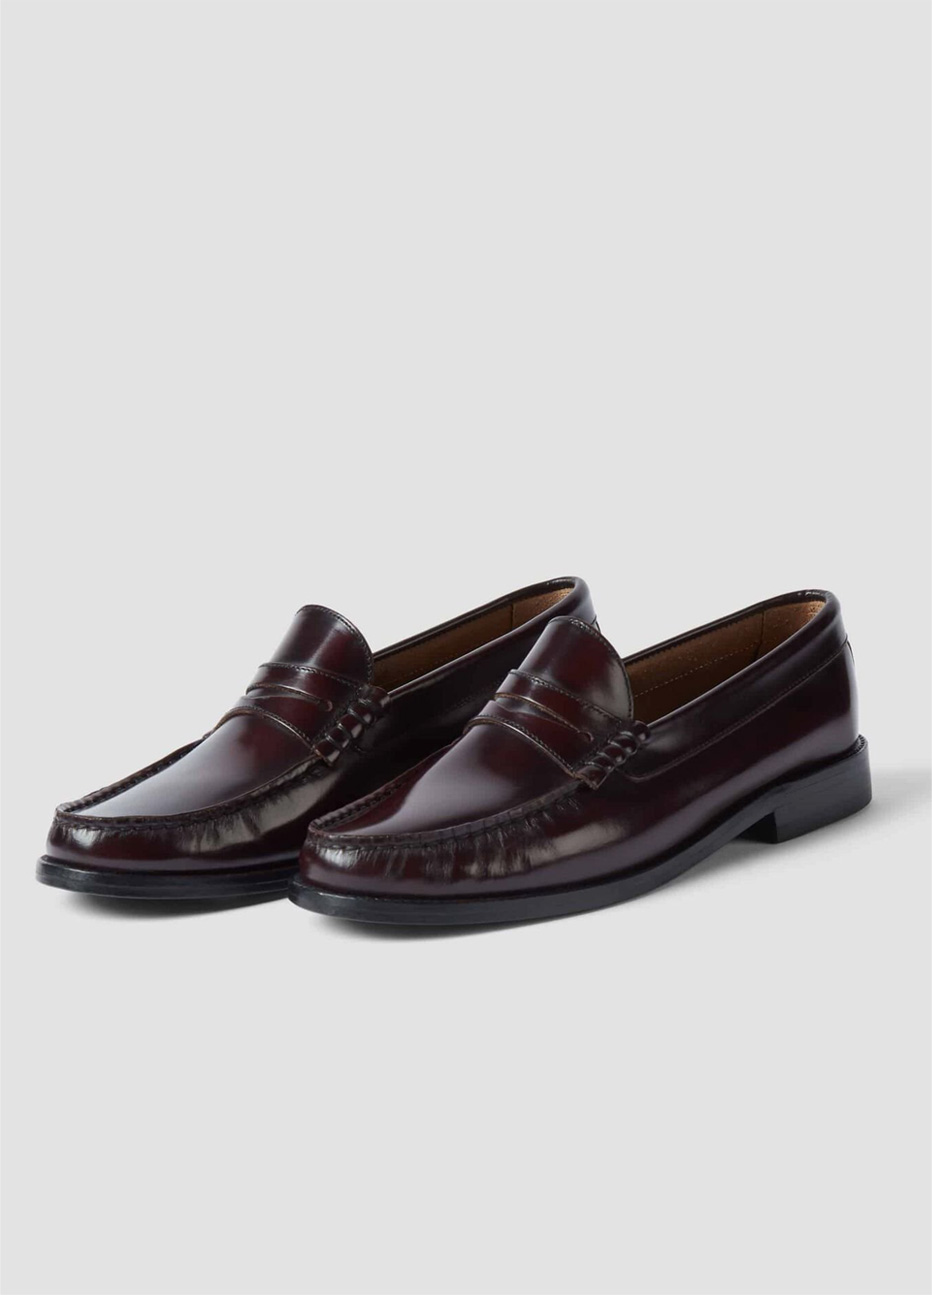 Black leather loafers by Hobbs.